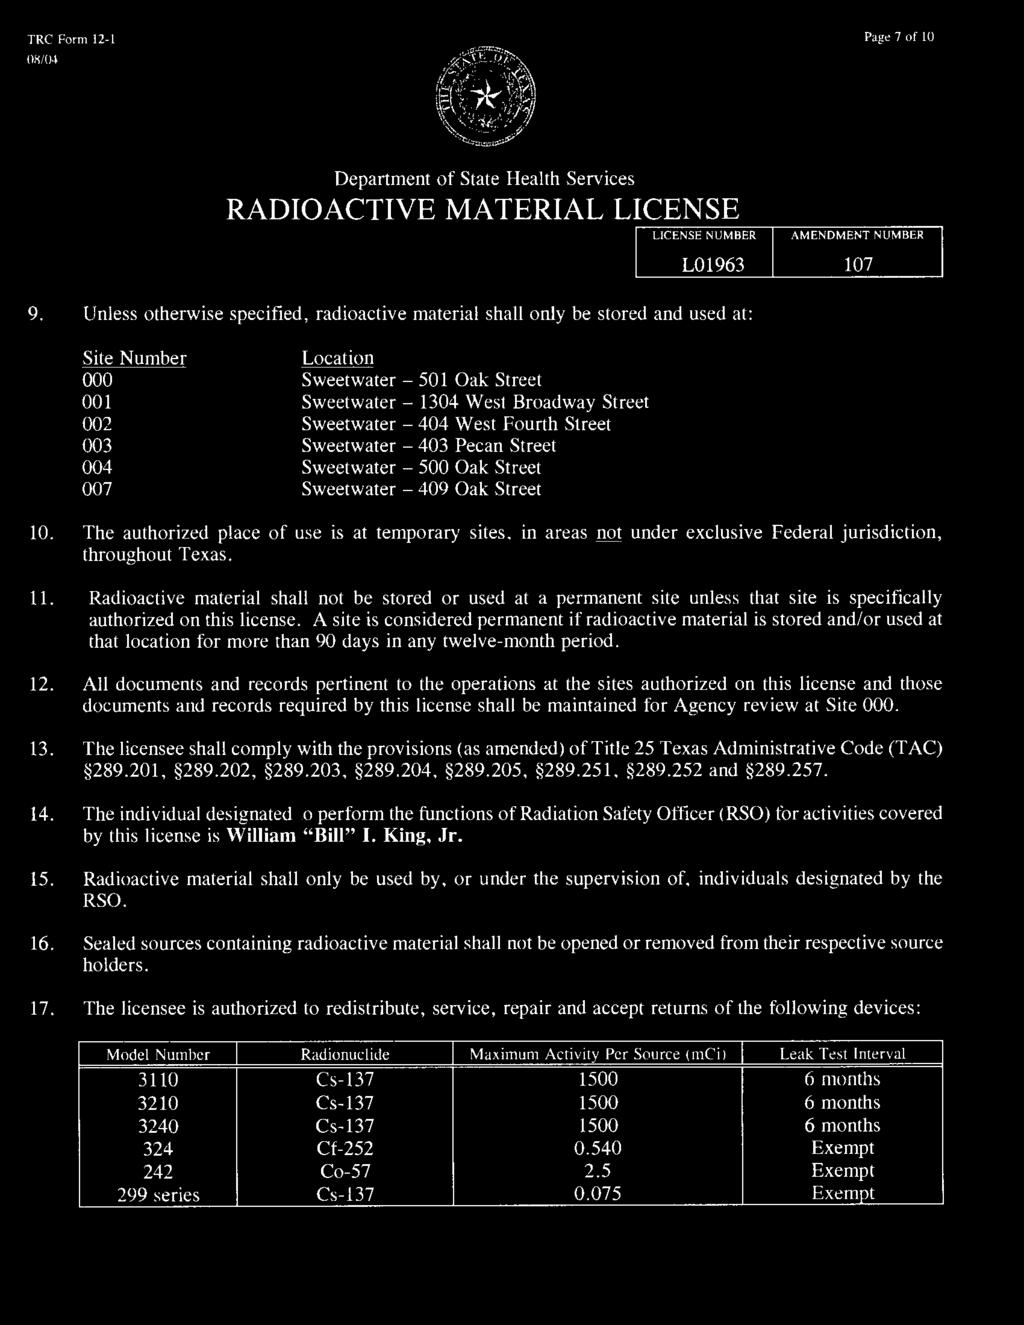 Radioactive material shall not be stored or used at a permanent site unless that site is specifically authorized on this license.